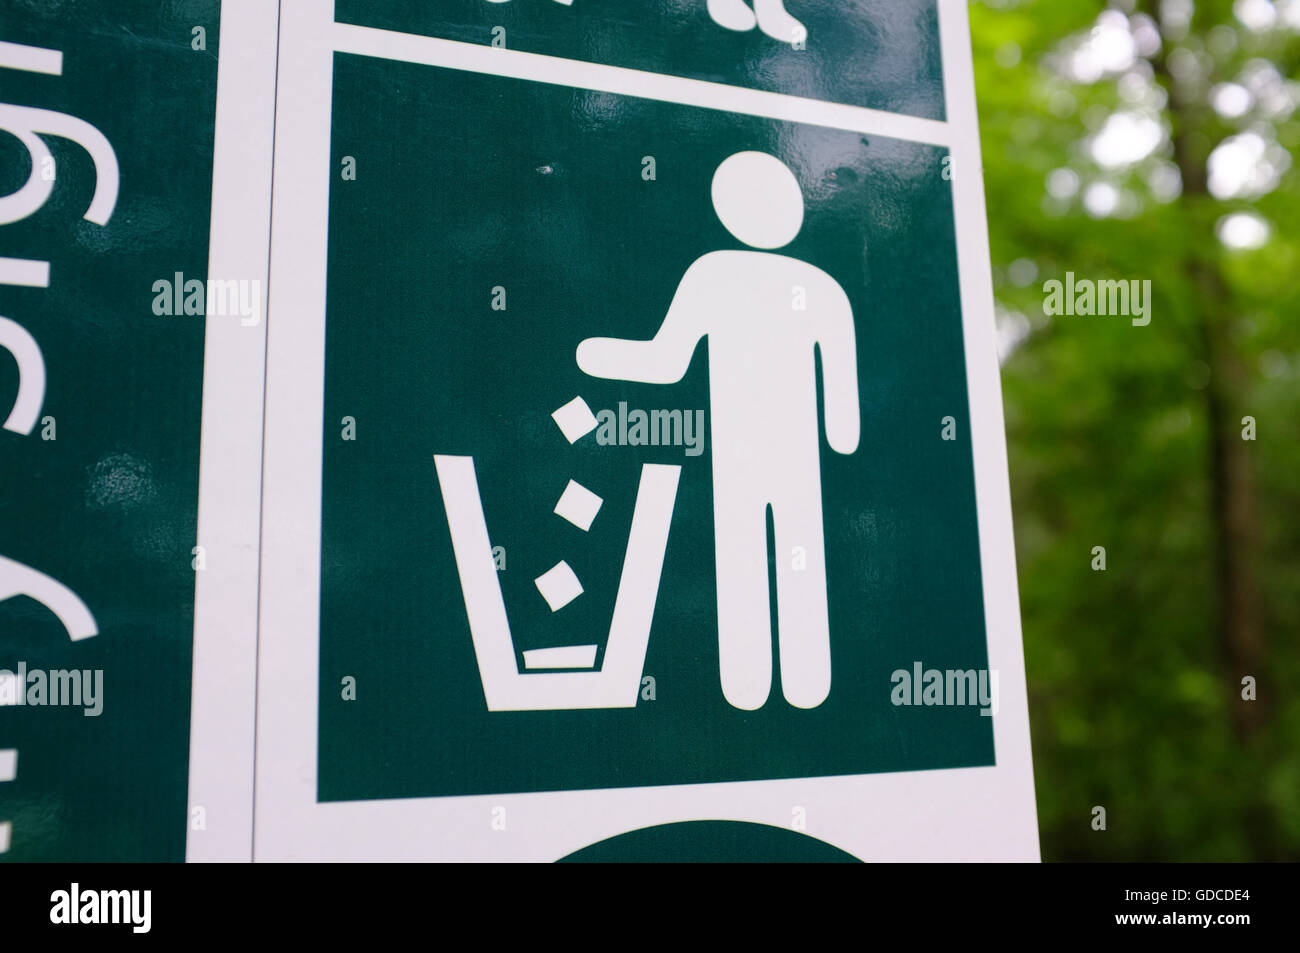 A public information sign advocating the use of rubbish bins in a Nature Reserve in Canada. Stock Photo